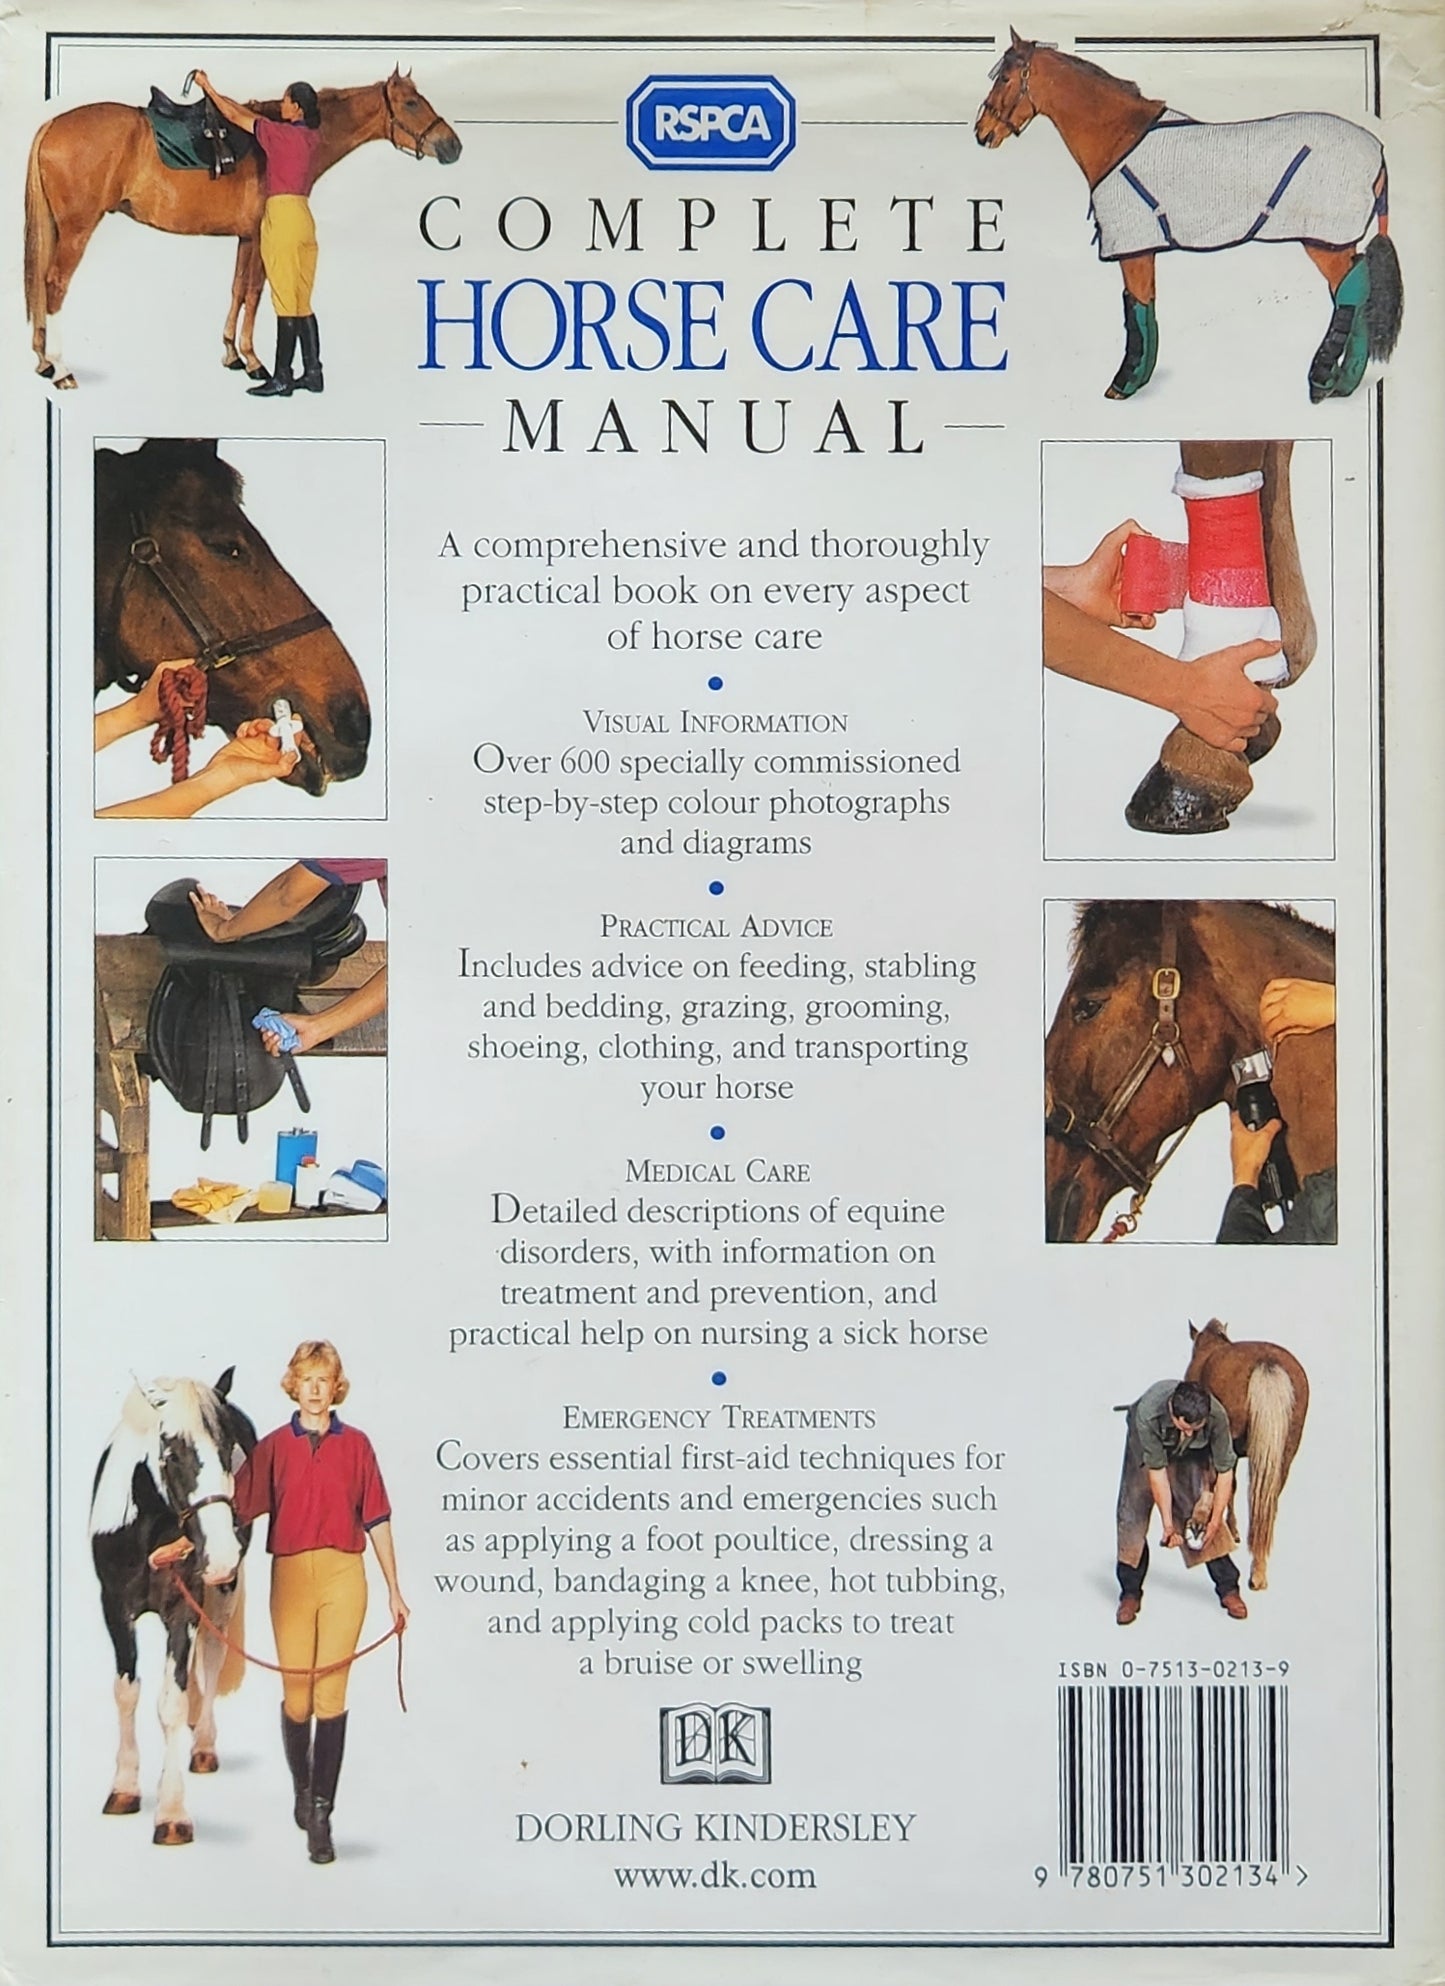 RSPCA Complete Horse Care Manual